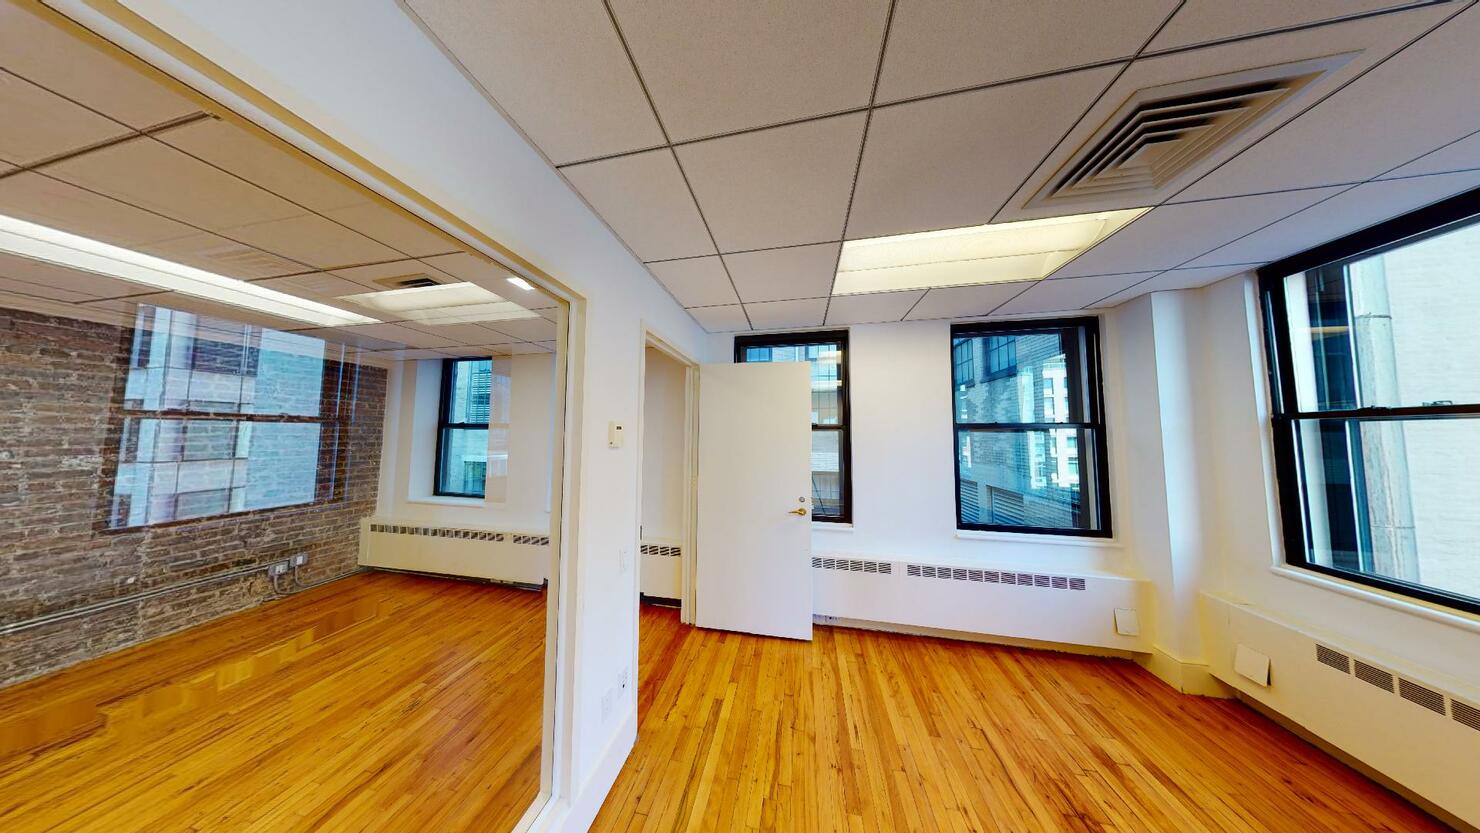 483 Tenth Avenue Office Space - Wall Partitions